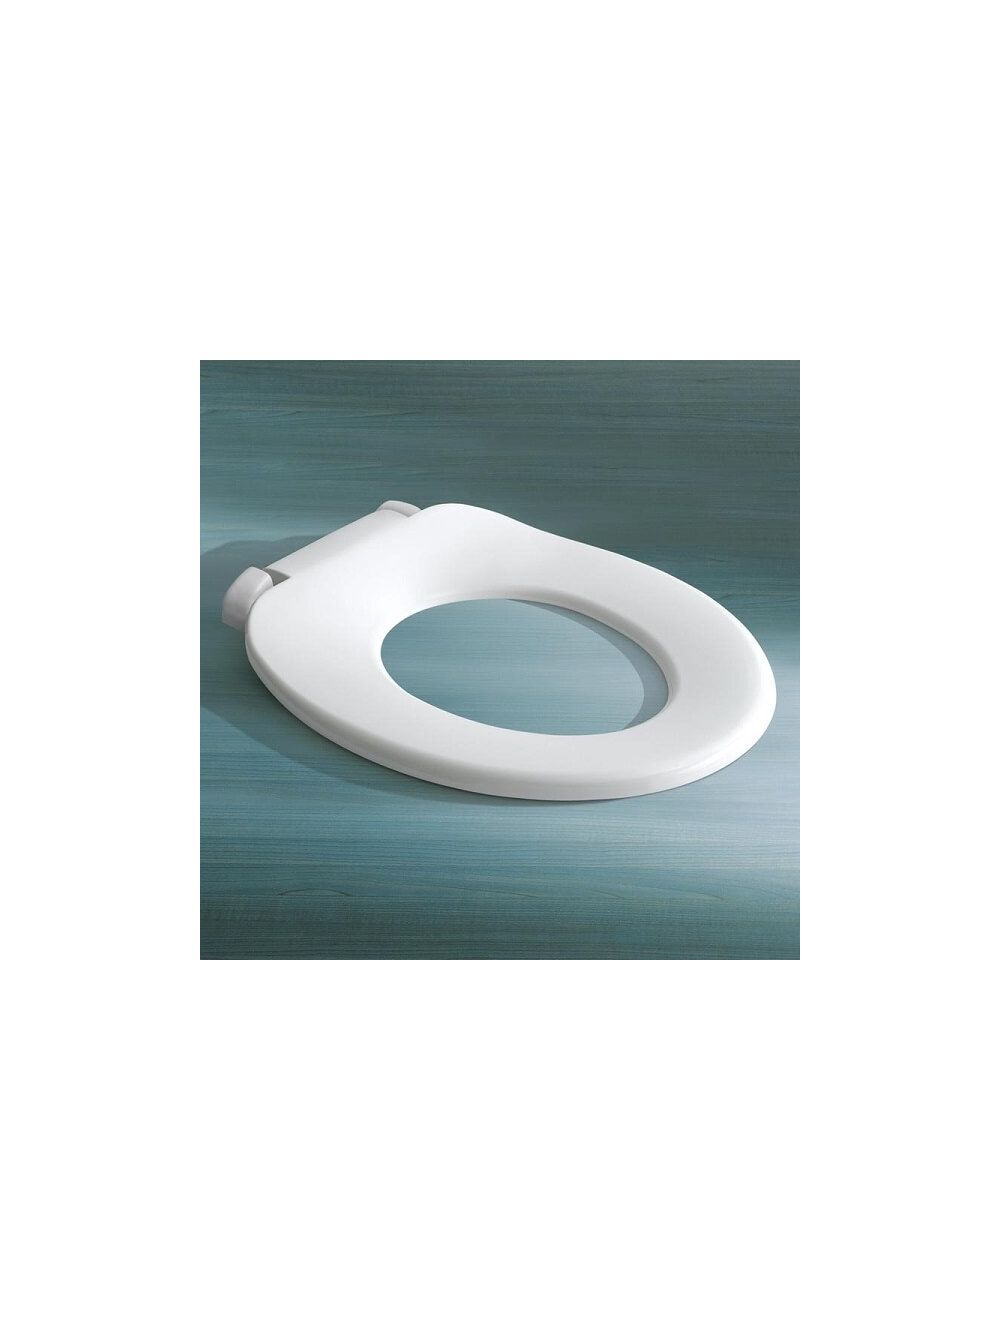 White Woolworths Strong Plastic Toilet Seat Durable Standard Fitting Brand 1-4 s 